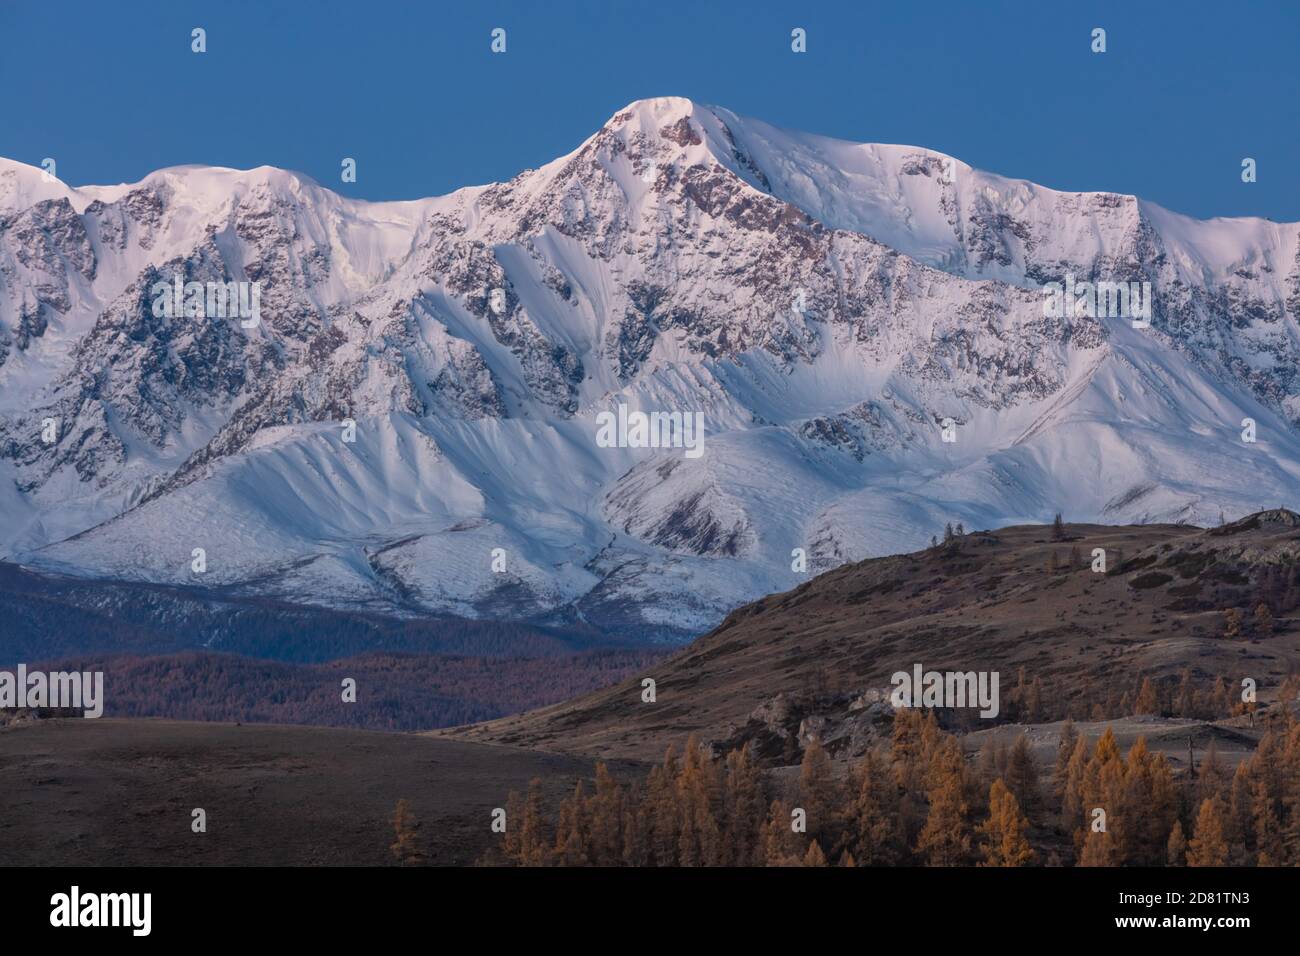 Beautiful shot of a white snowy mountain and hills with trees in the foreground. Fall time. Sunrise. Blue hour. Altai mountains, Russia. Stock Photo